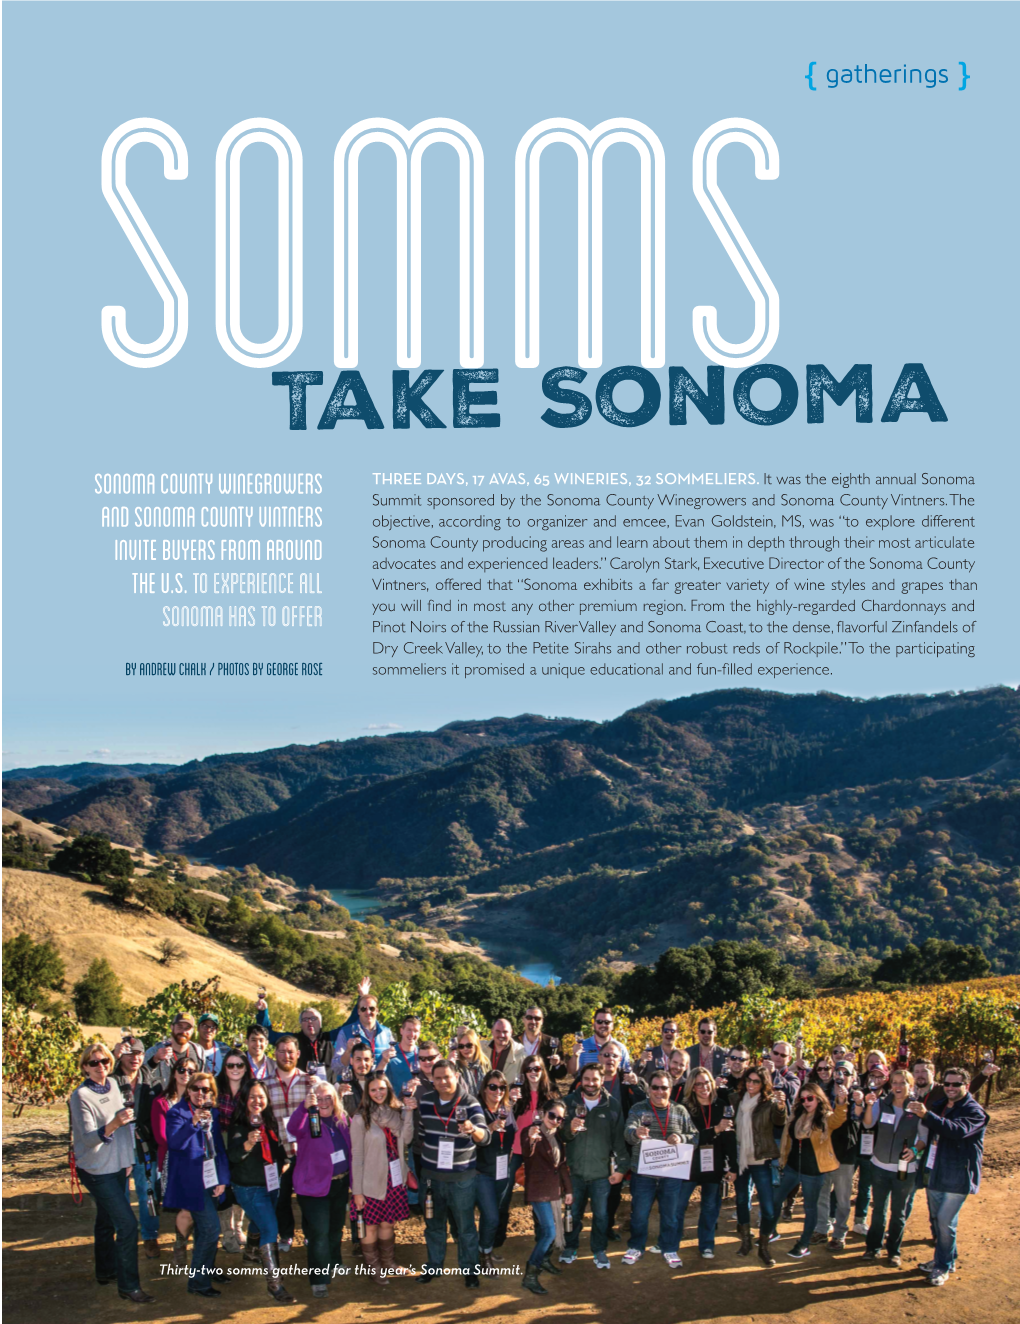 Take Sonoma SONOMA COUNTY WINEGROWERS THREE DAYS, 17 AVAS, 65 WINERIES, 32 SOMMELIERS